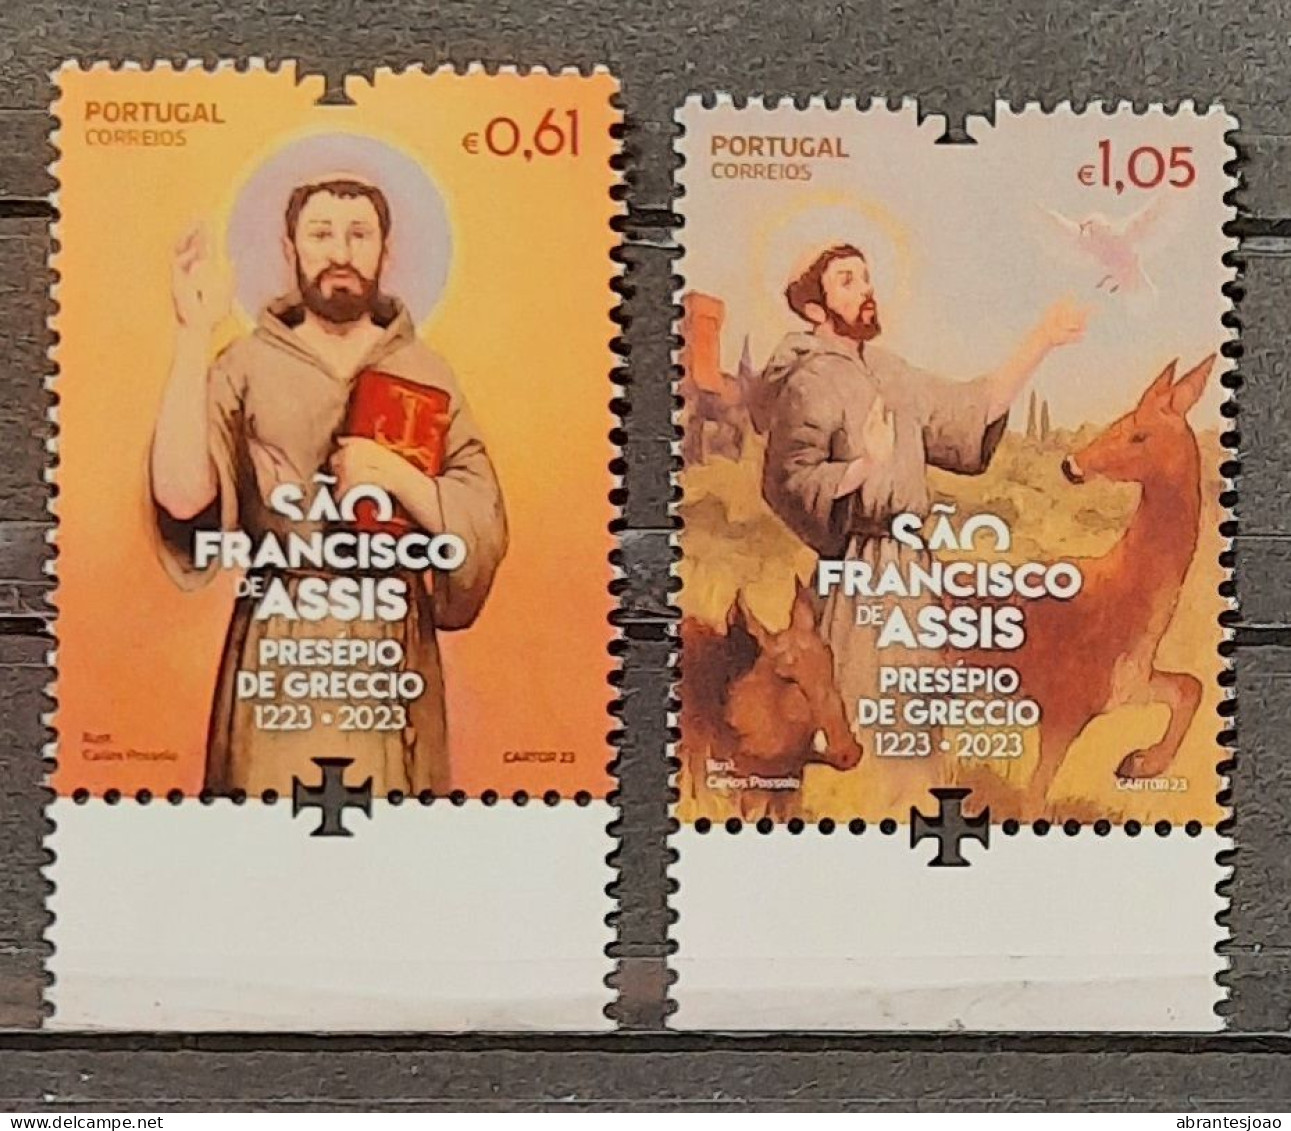 2023 - Portugal - MNH - Saint Francis Of Assis - Presepius Of Greccio - 1223/2023 - 2 Stamps + Block Of 1 Stamp - Nuovi